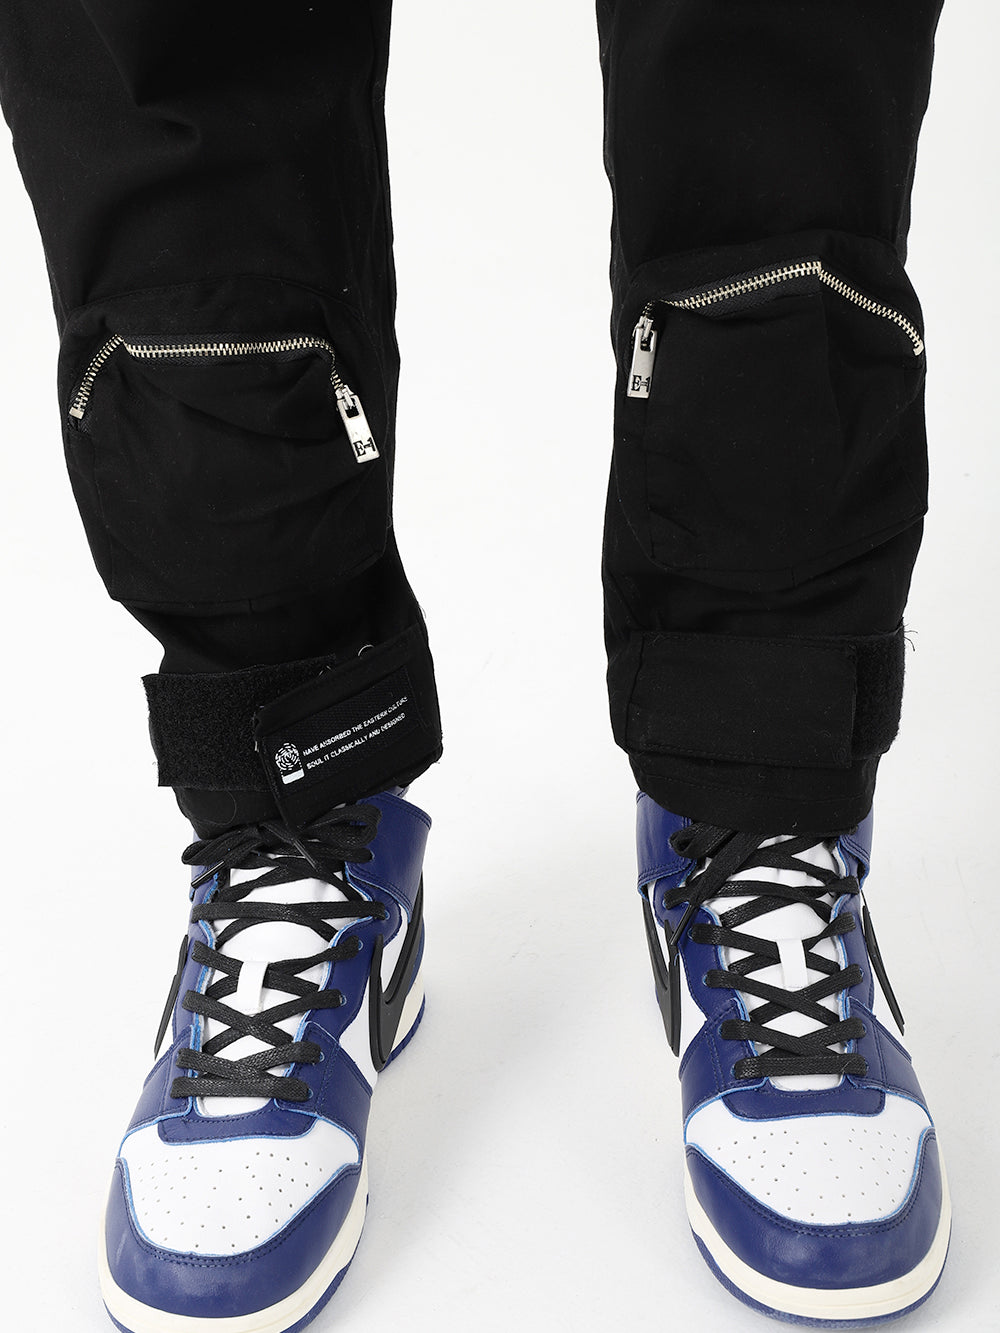 A pair of black and white RAIDER JOGGERS with zippers on them.